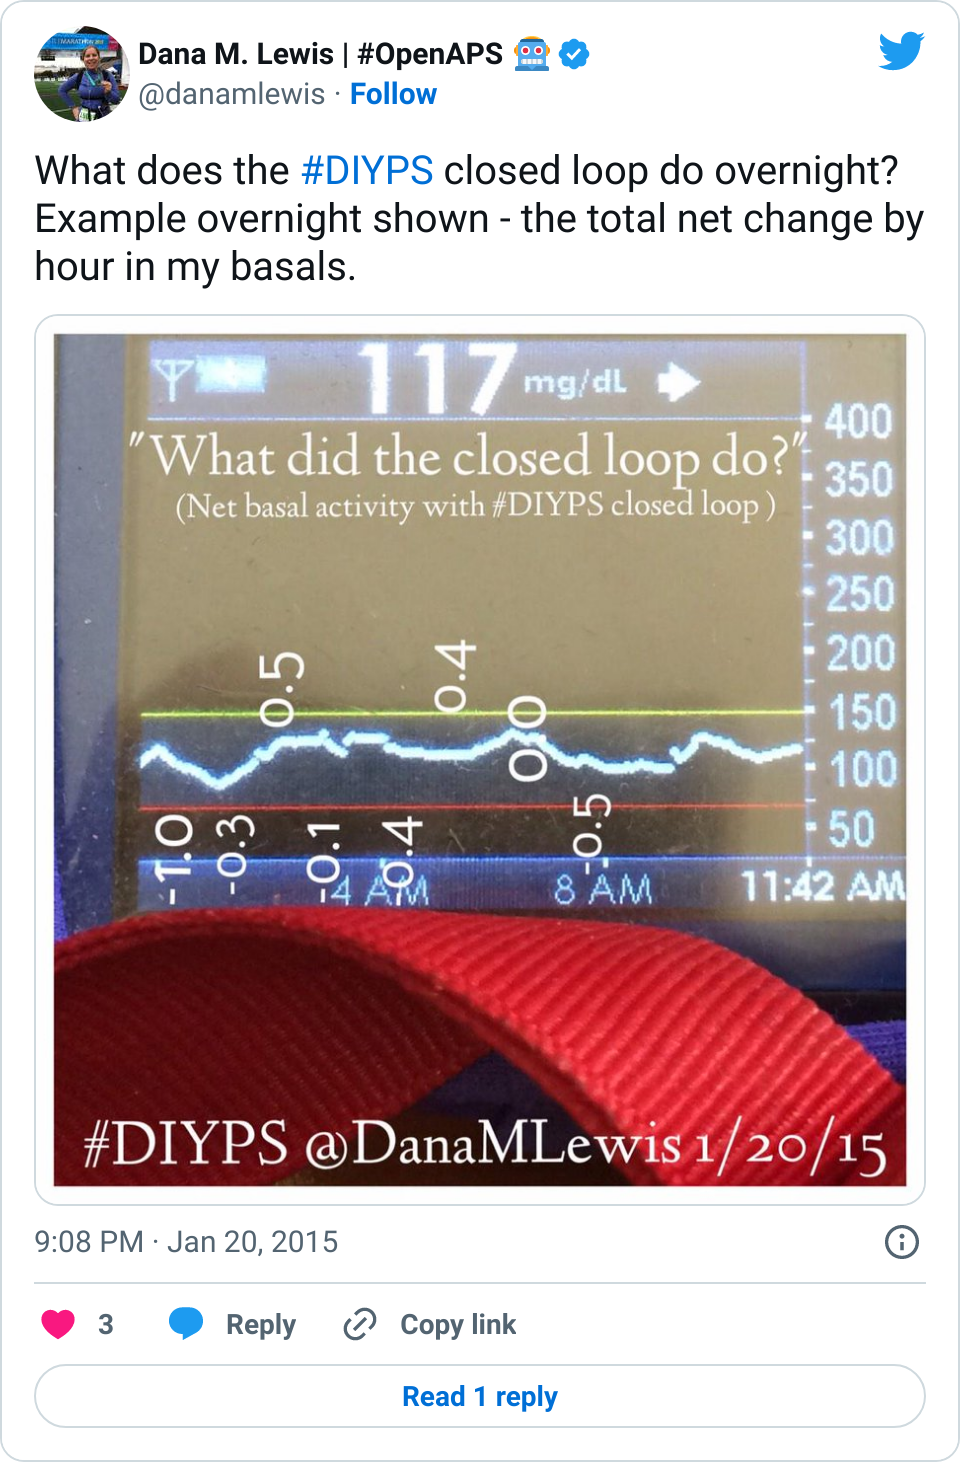 Tweet illustrating how DIYPS closed loop works overnight with micro corrections to keep blood glucose in range